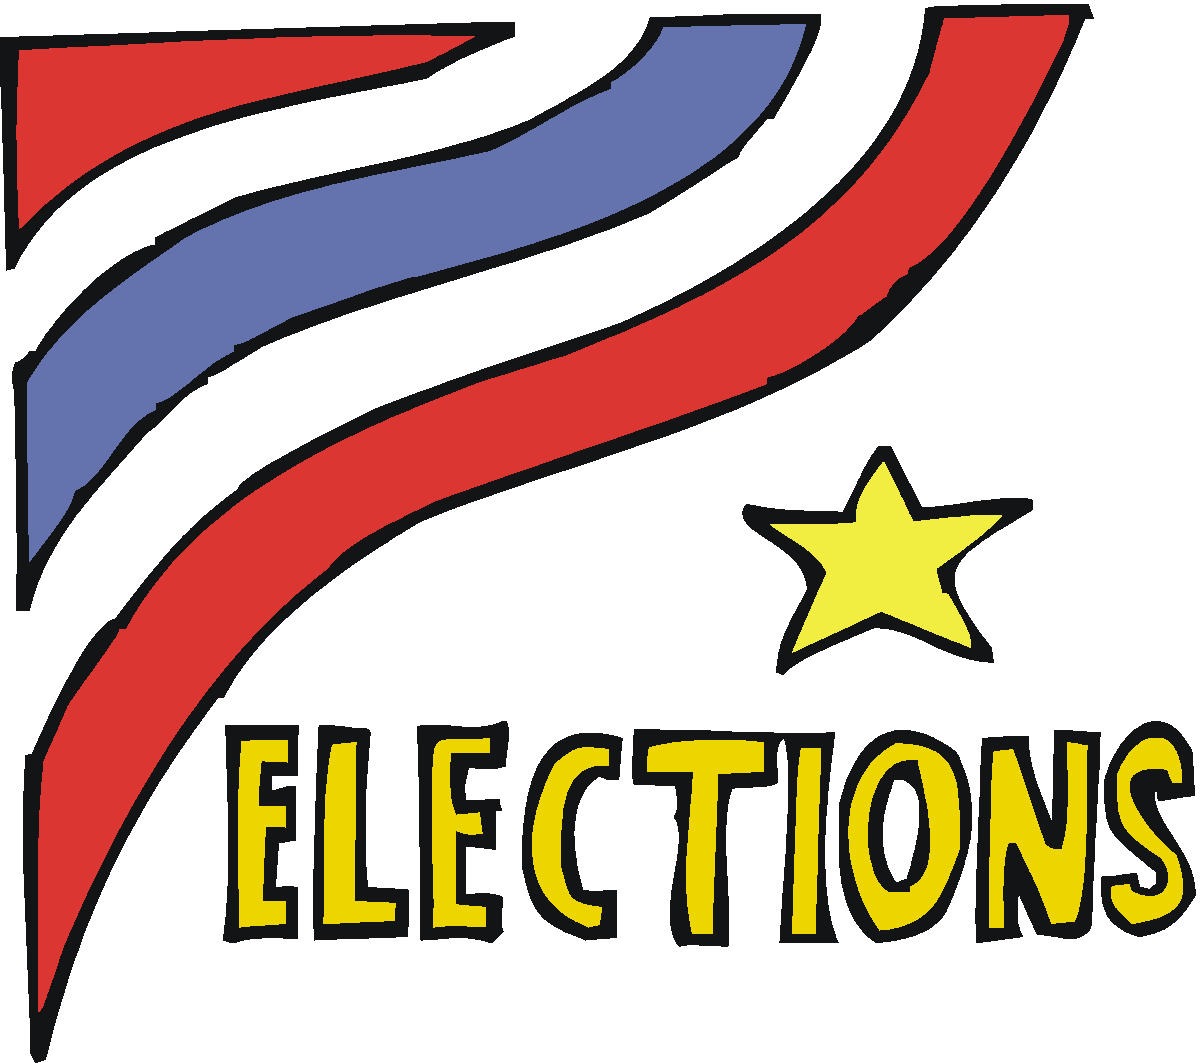 Election 20clipart | Clipart library - Free Clipart Images